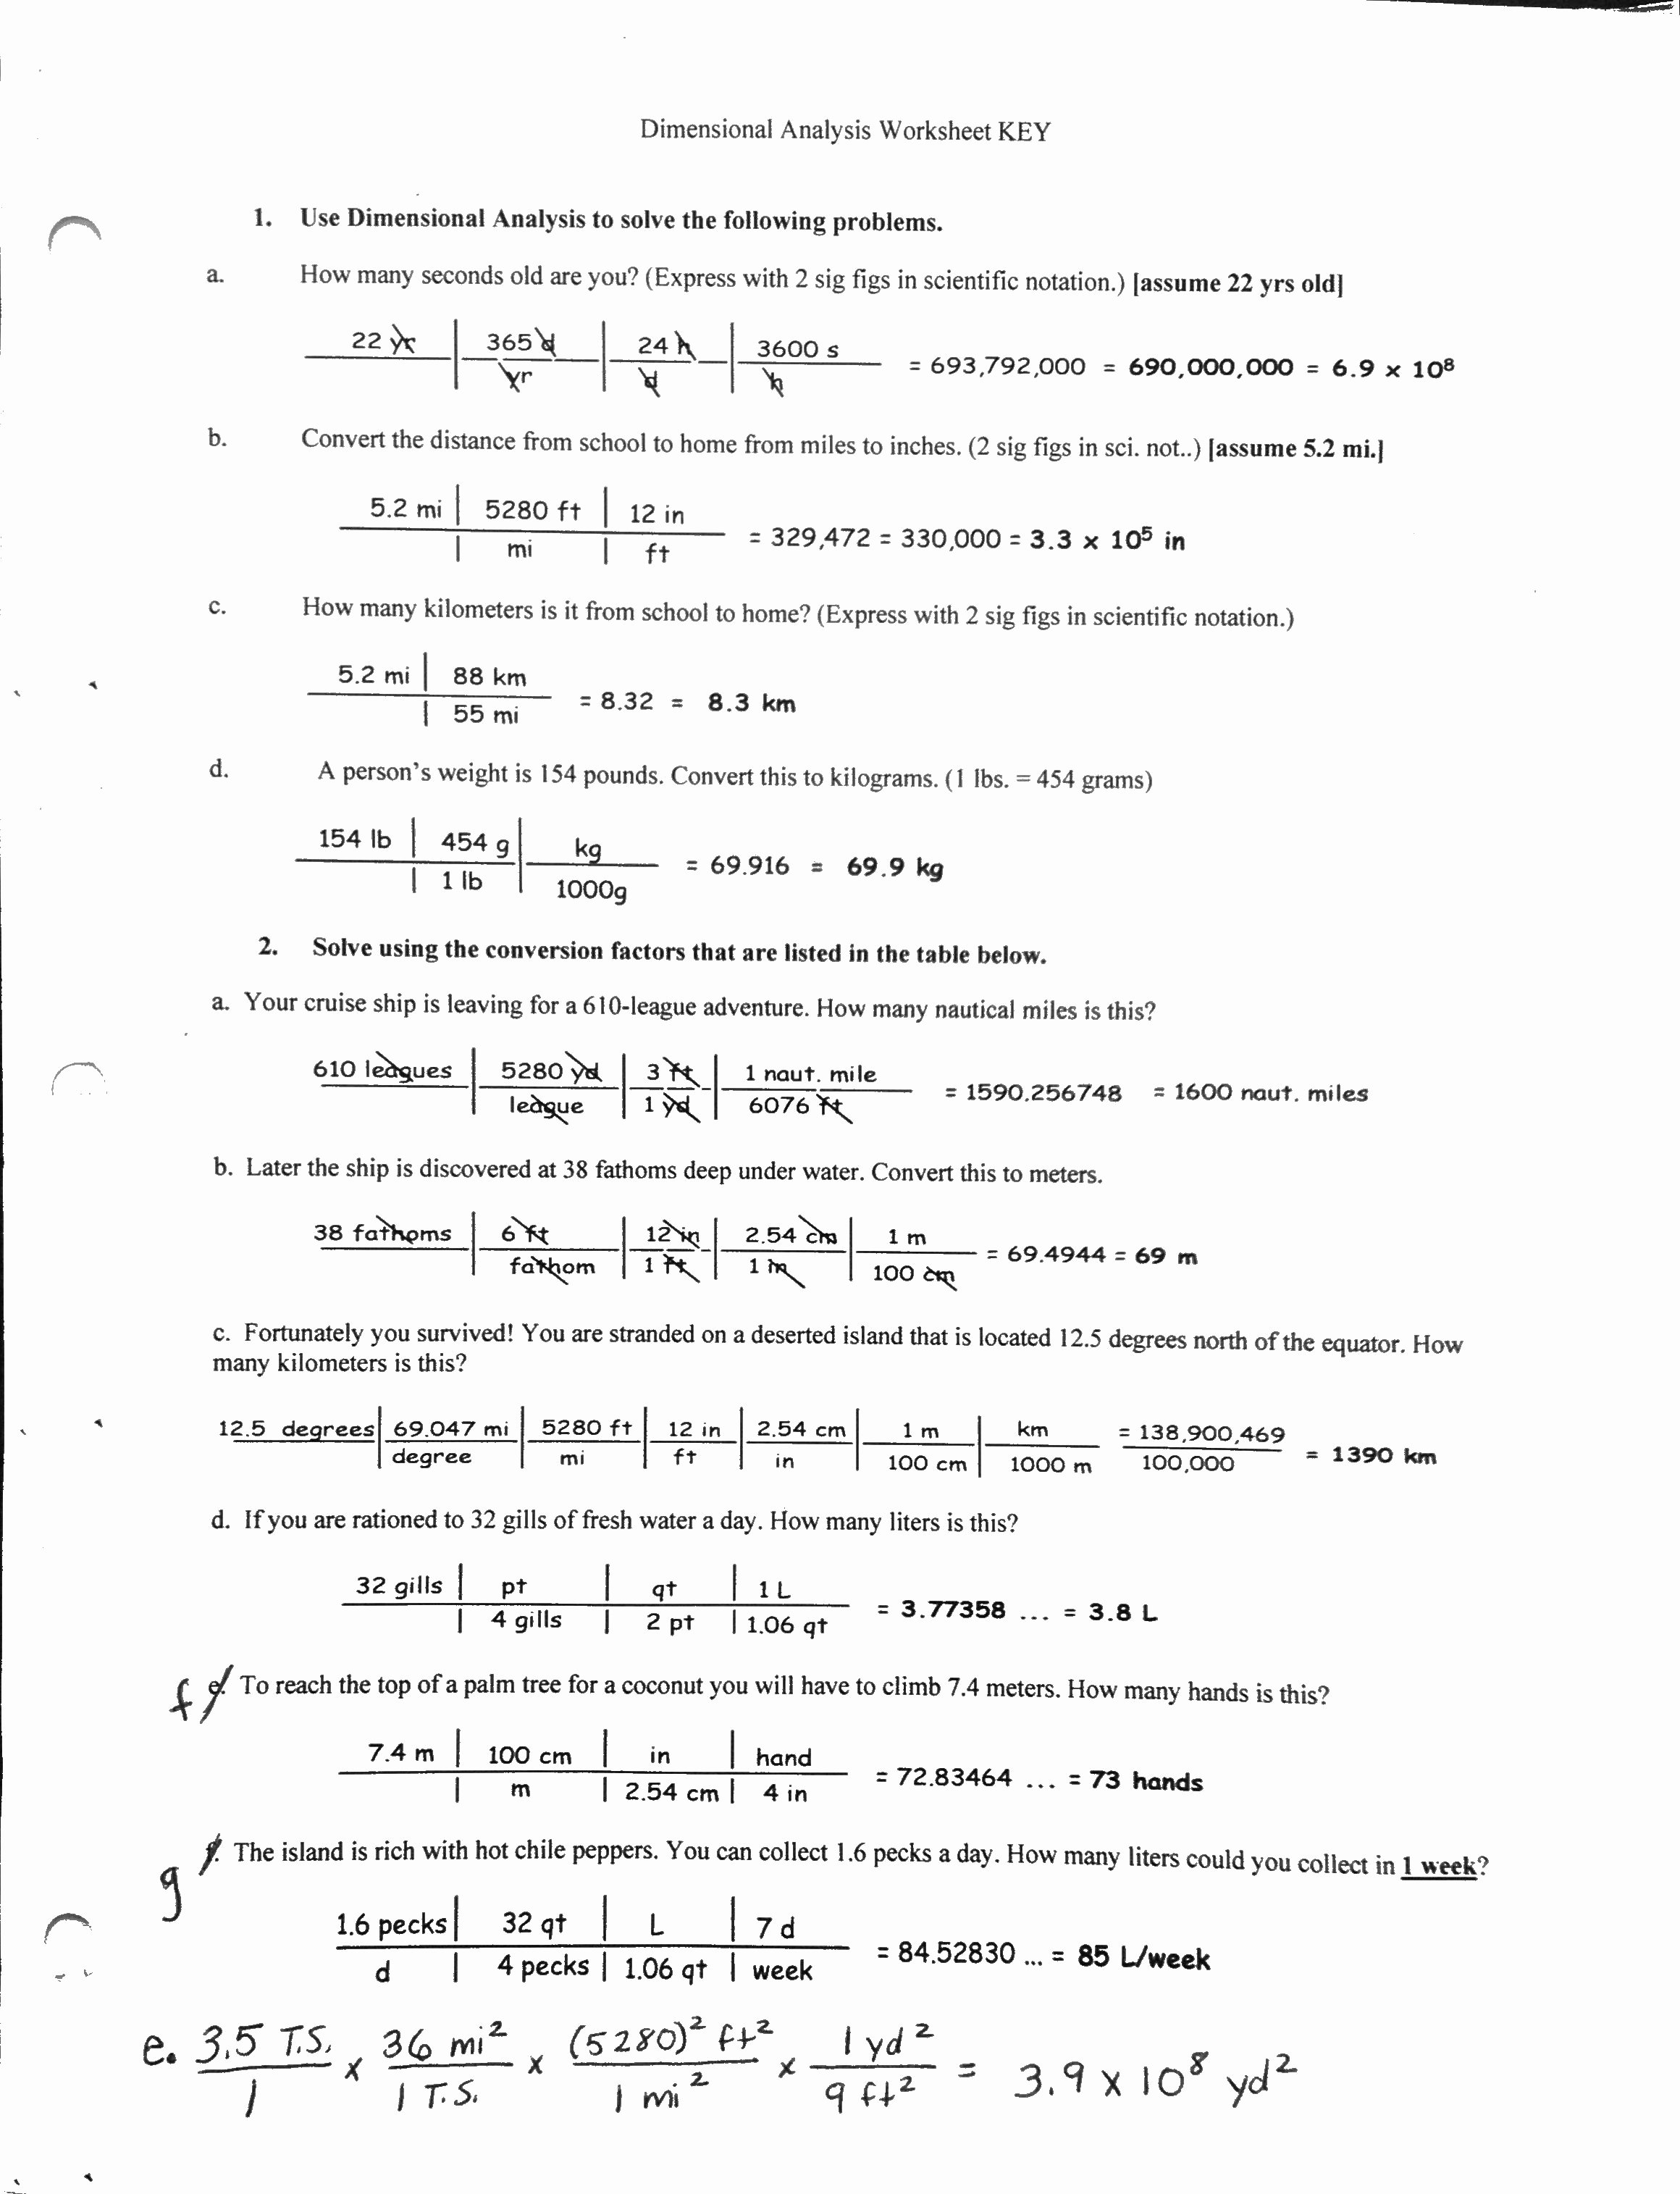 Chemistry Conversion Factors Worksheet New Dimensional Analysis Worksheet with Answer Key the Best